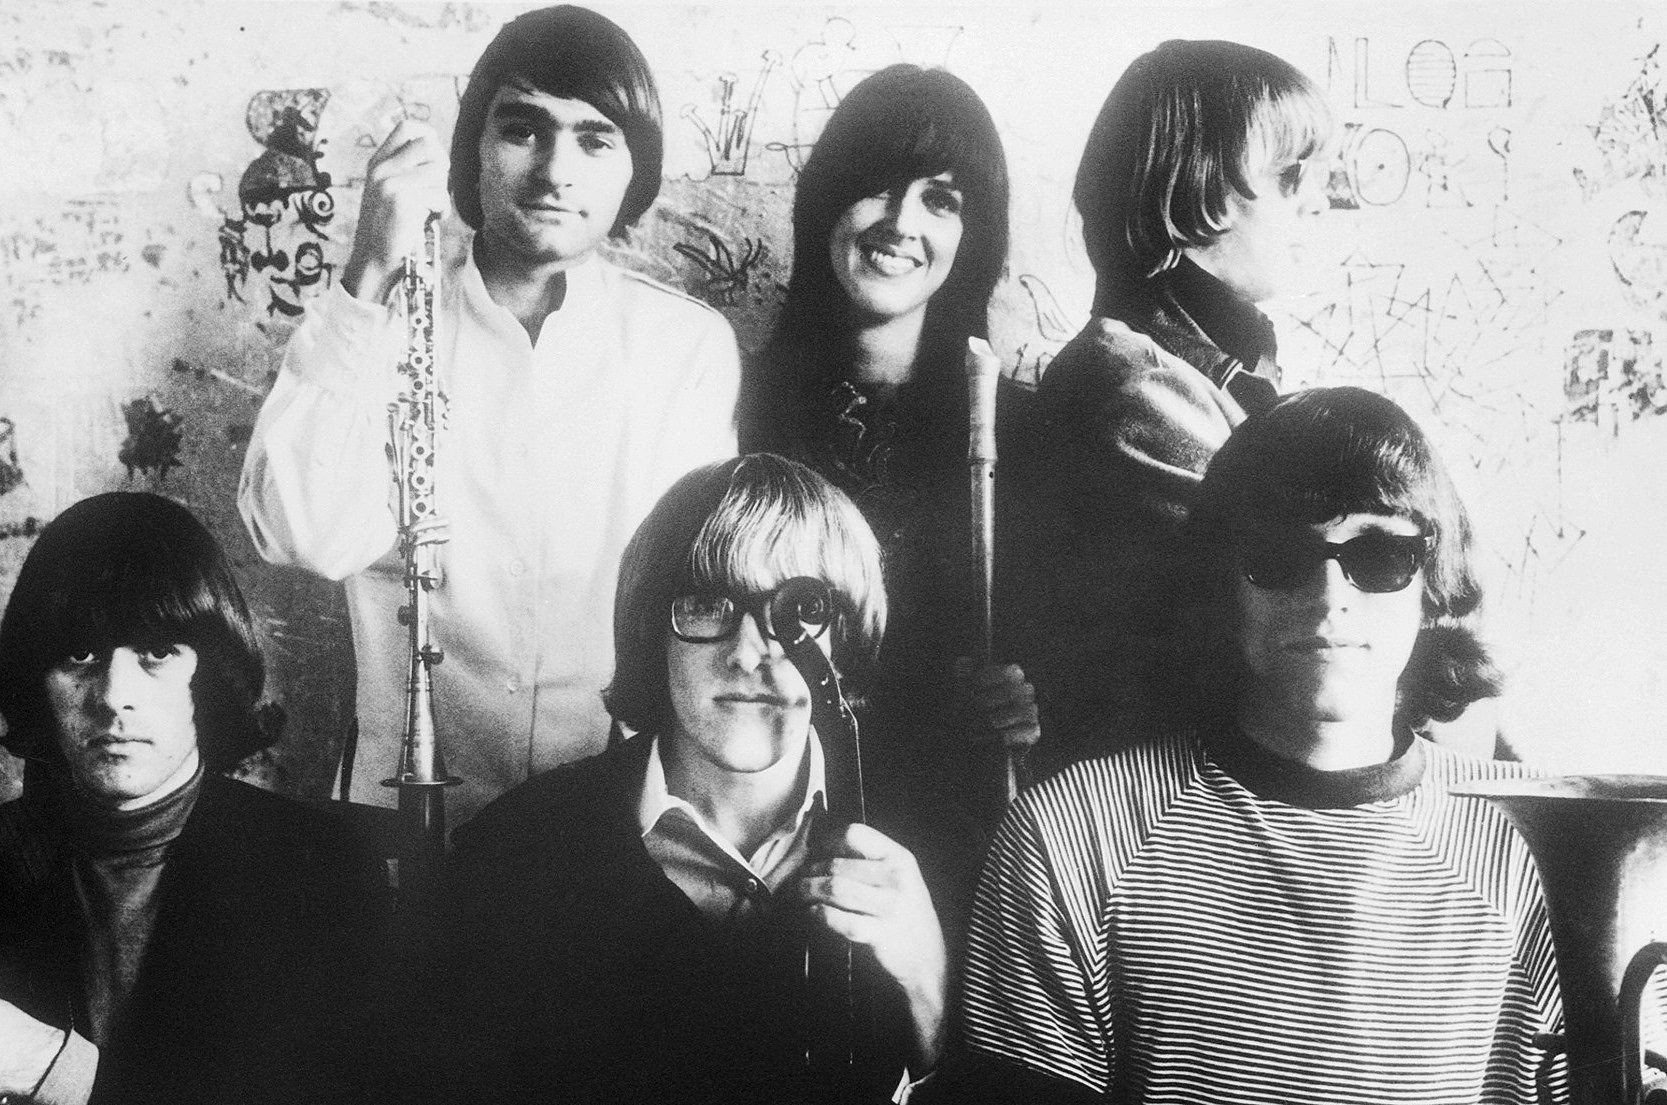 Beyond “White Rabbit”: Why Jefferson Airplane were one of psychedelic  rock's greatest bands